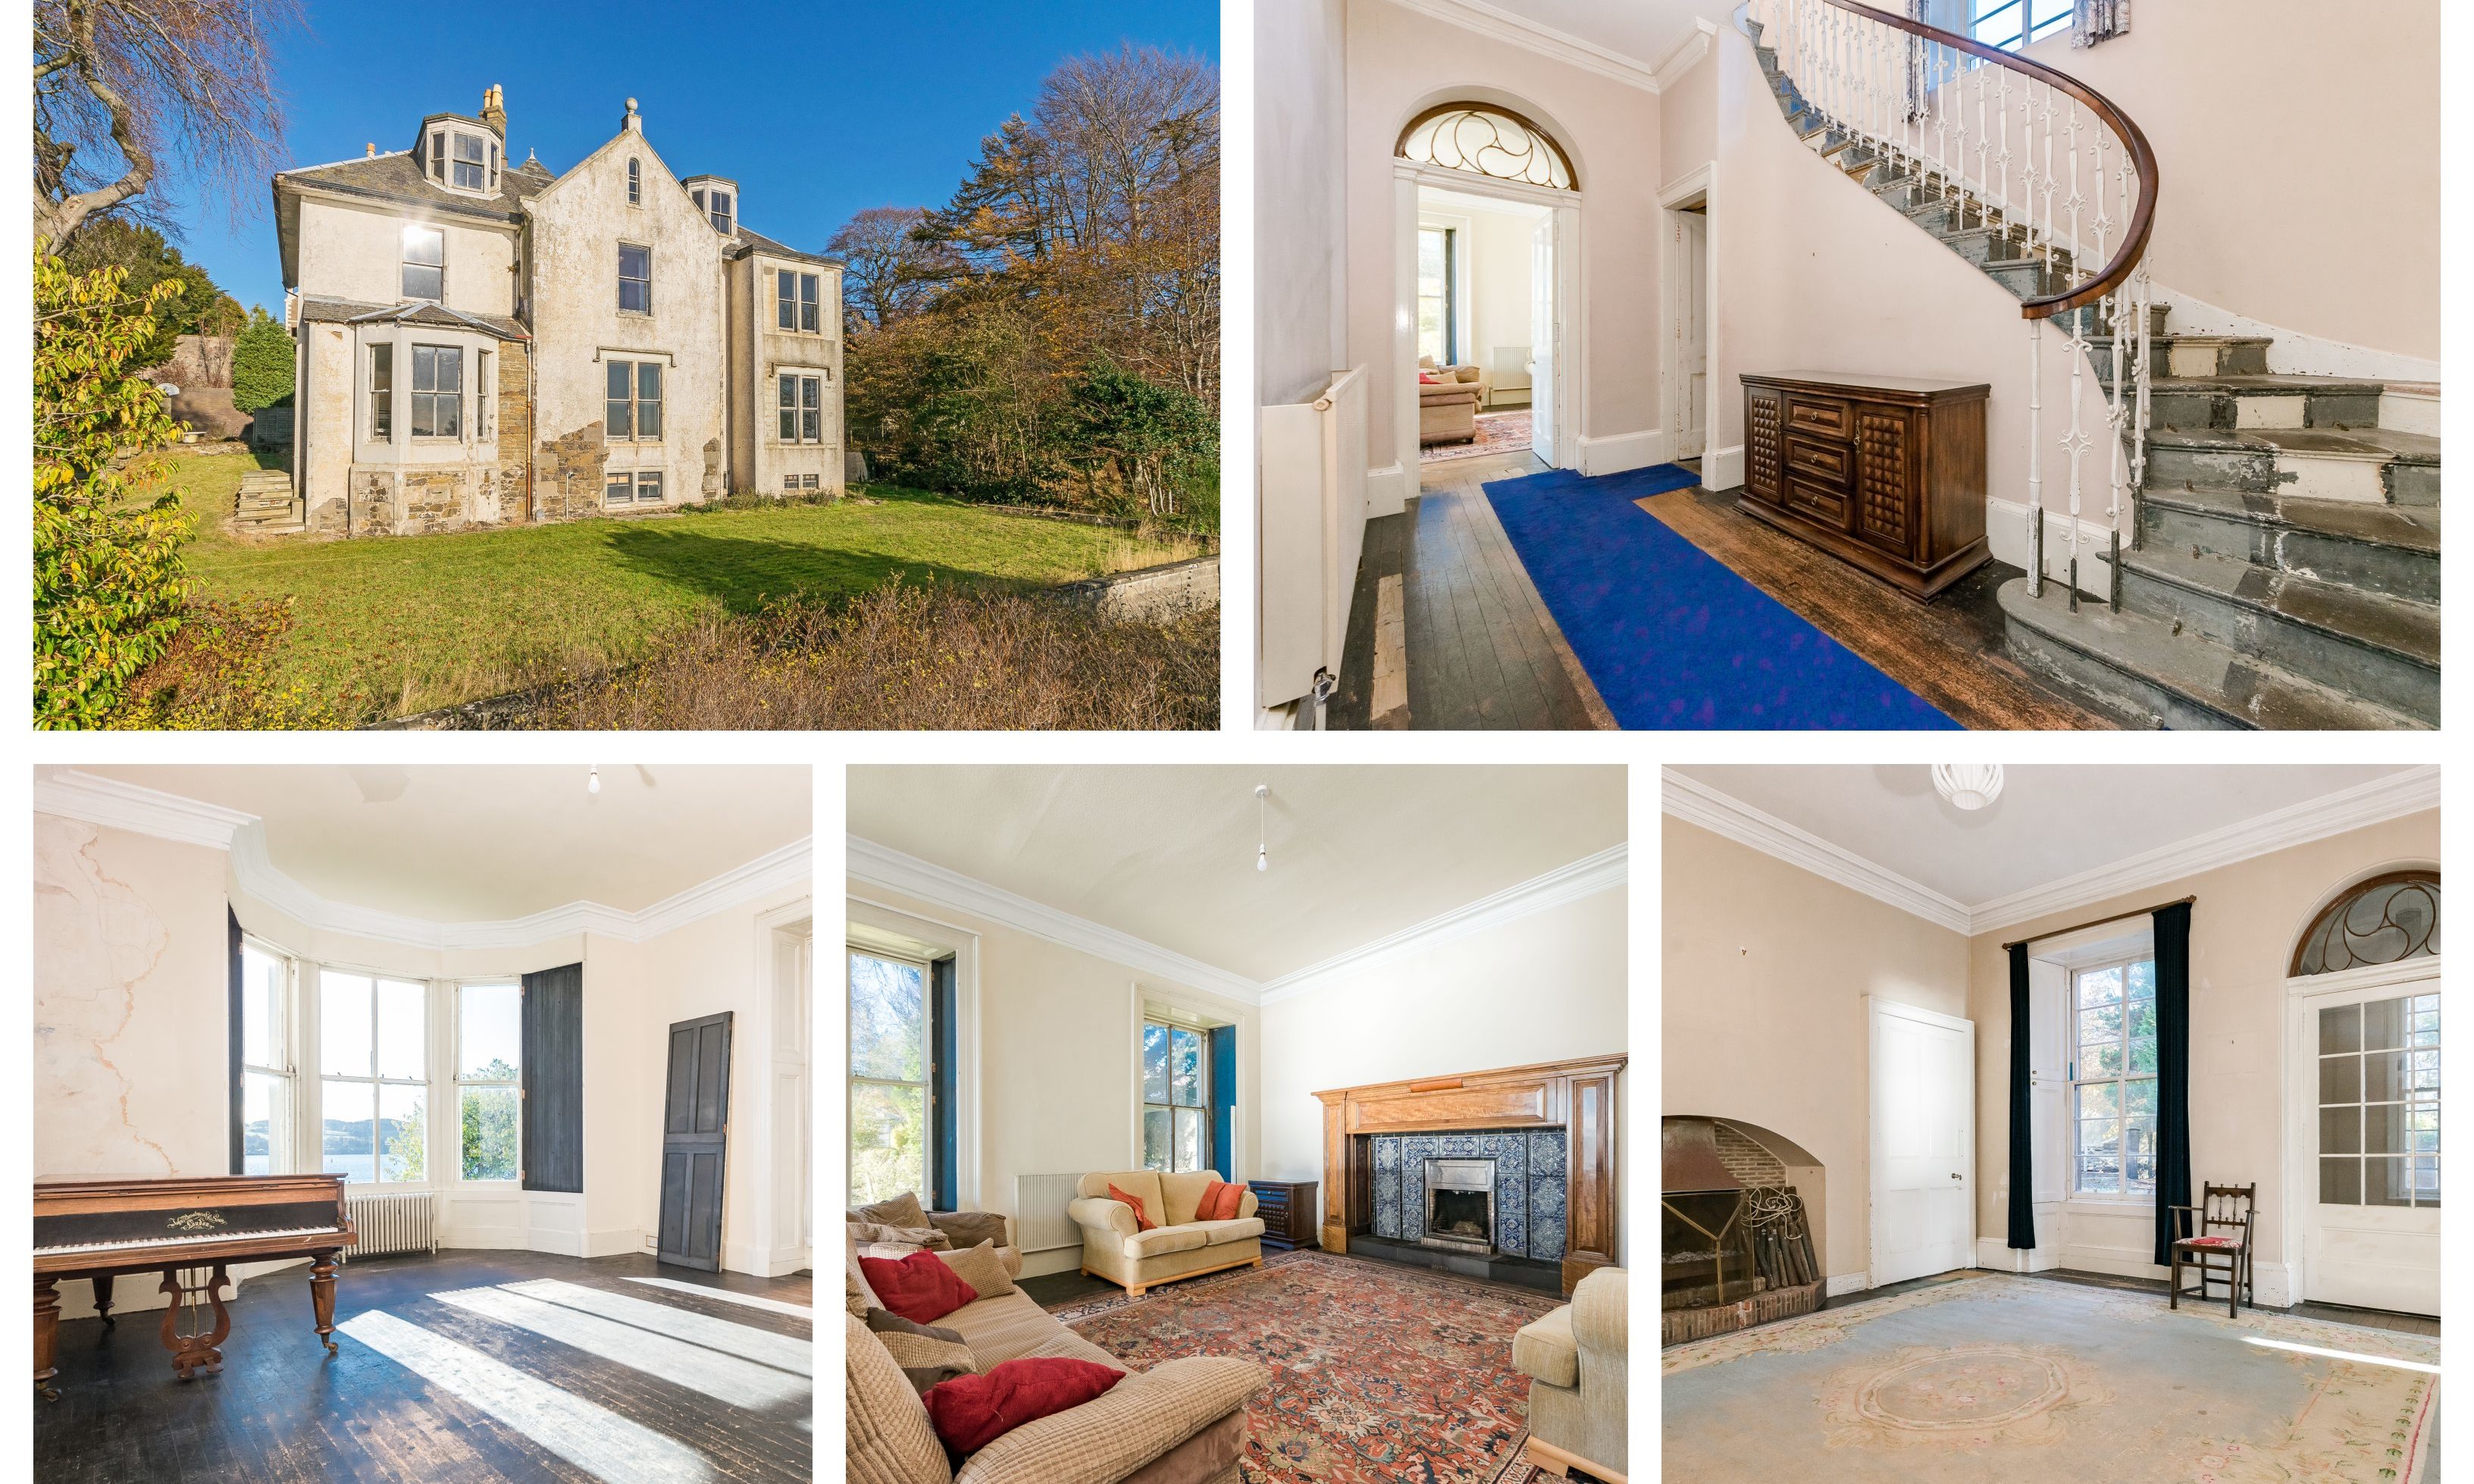 Harecraig House in Broughty Ferry has gone on the market.